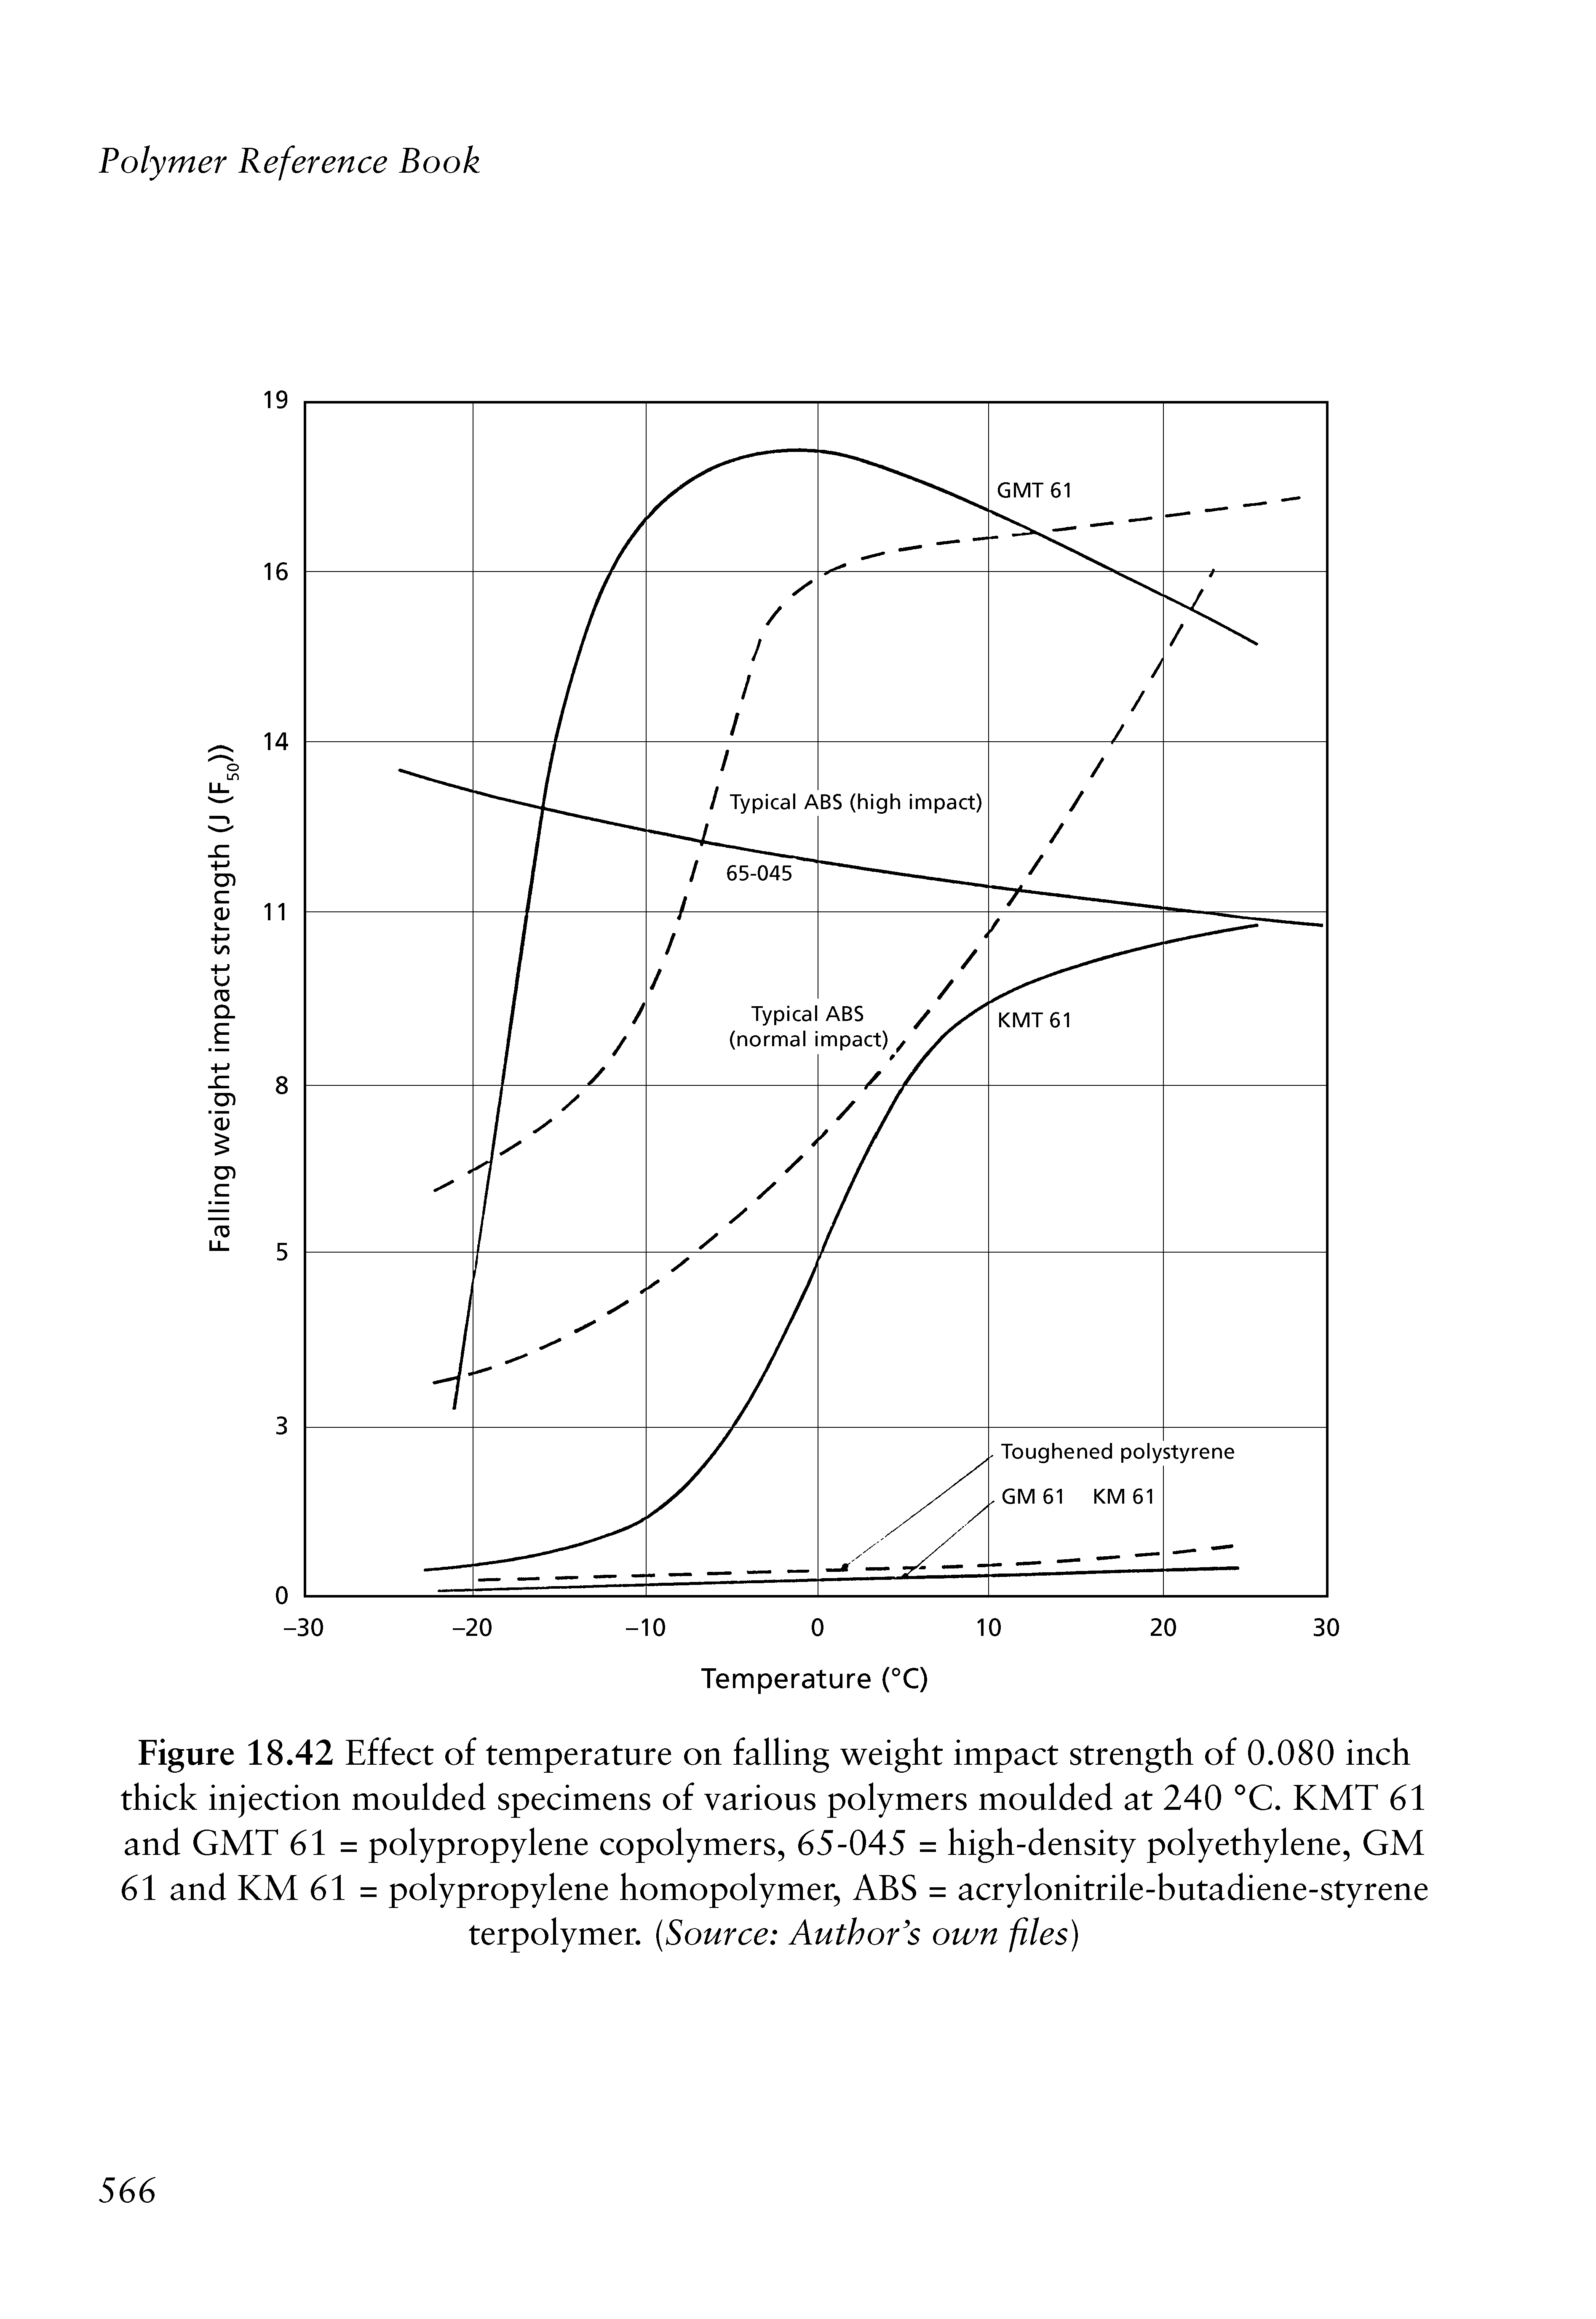 Figure 18.42 Effect of temperature on falling weight impact strength of 0.080 inch thick injection moulded specimens of various polymers moulded at 240 °C. KMT 61 and GMT 61 = polypropylene copolymers, 65-045 = high-density polyethylene, GM 61 and KM 61 = polypropylene homopolymer, ABS = acrylonitrile-butadiene-styrene terpolymer. Source Author s own files)...